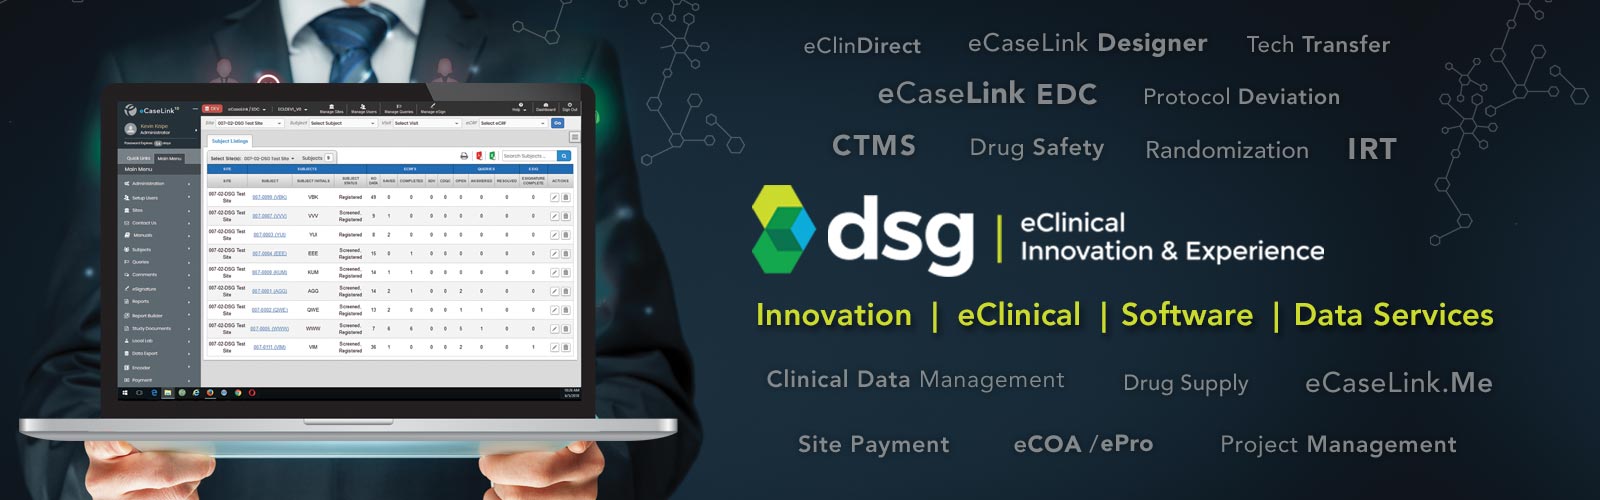 eClinical Software & Clinical Data Management by DSG